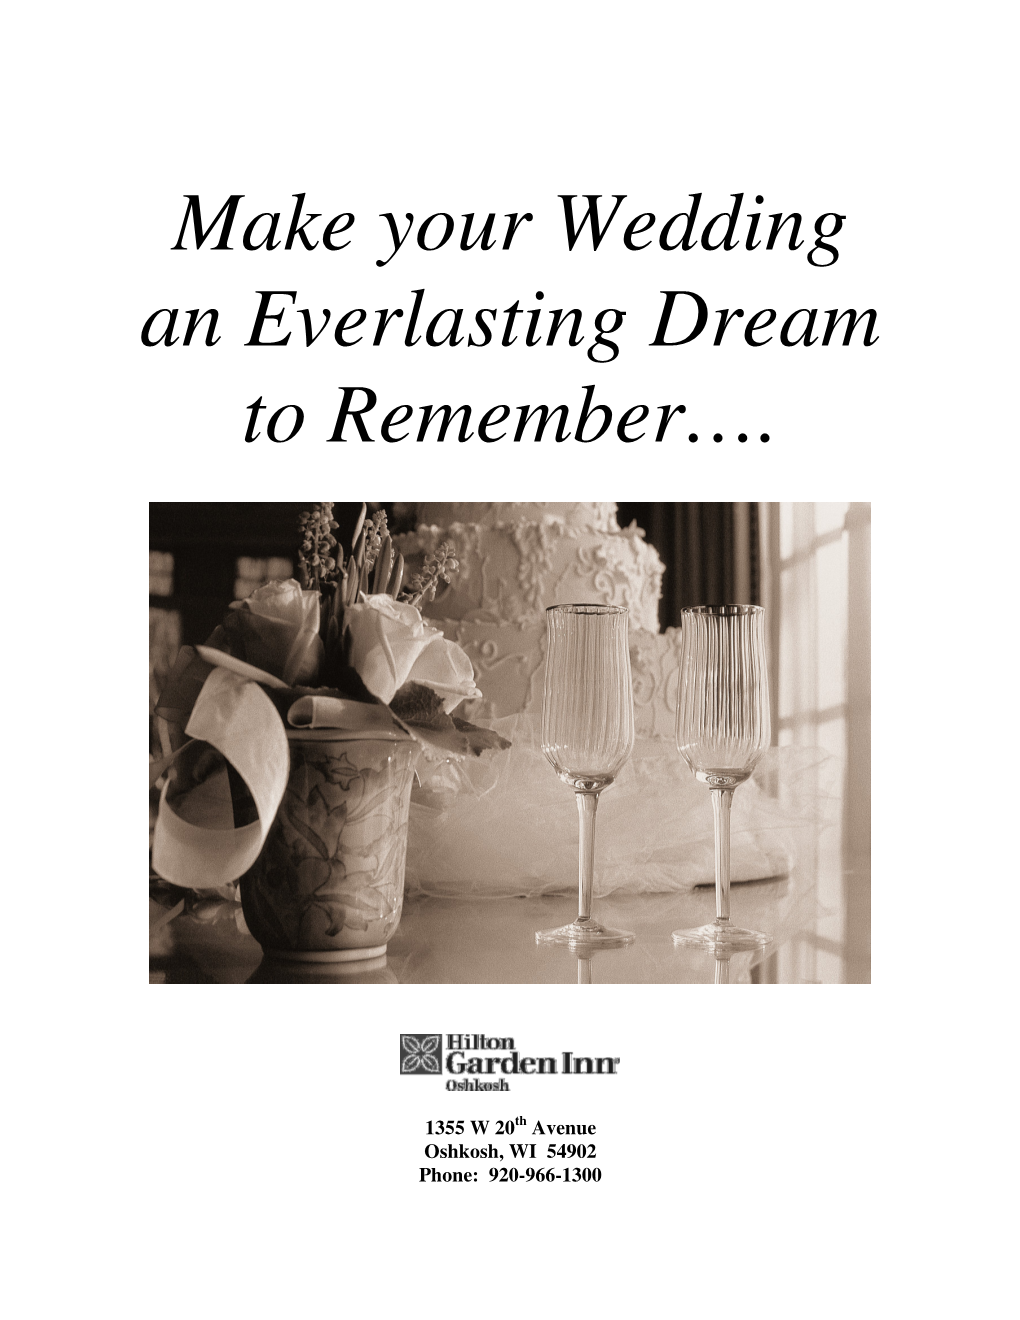 Make Your Wedding an Everlasting Dream to Remember…